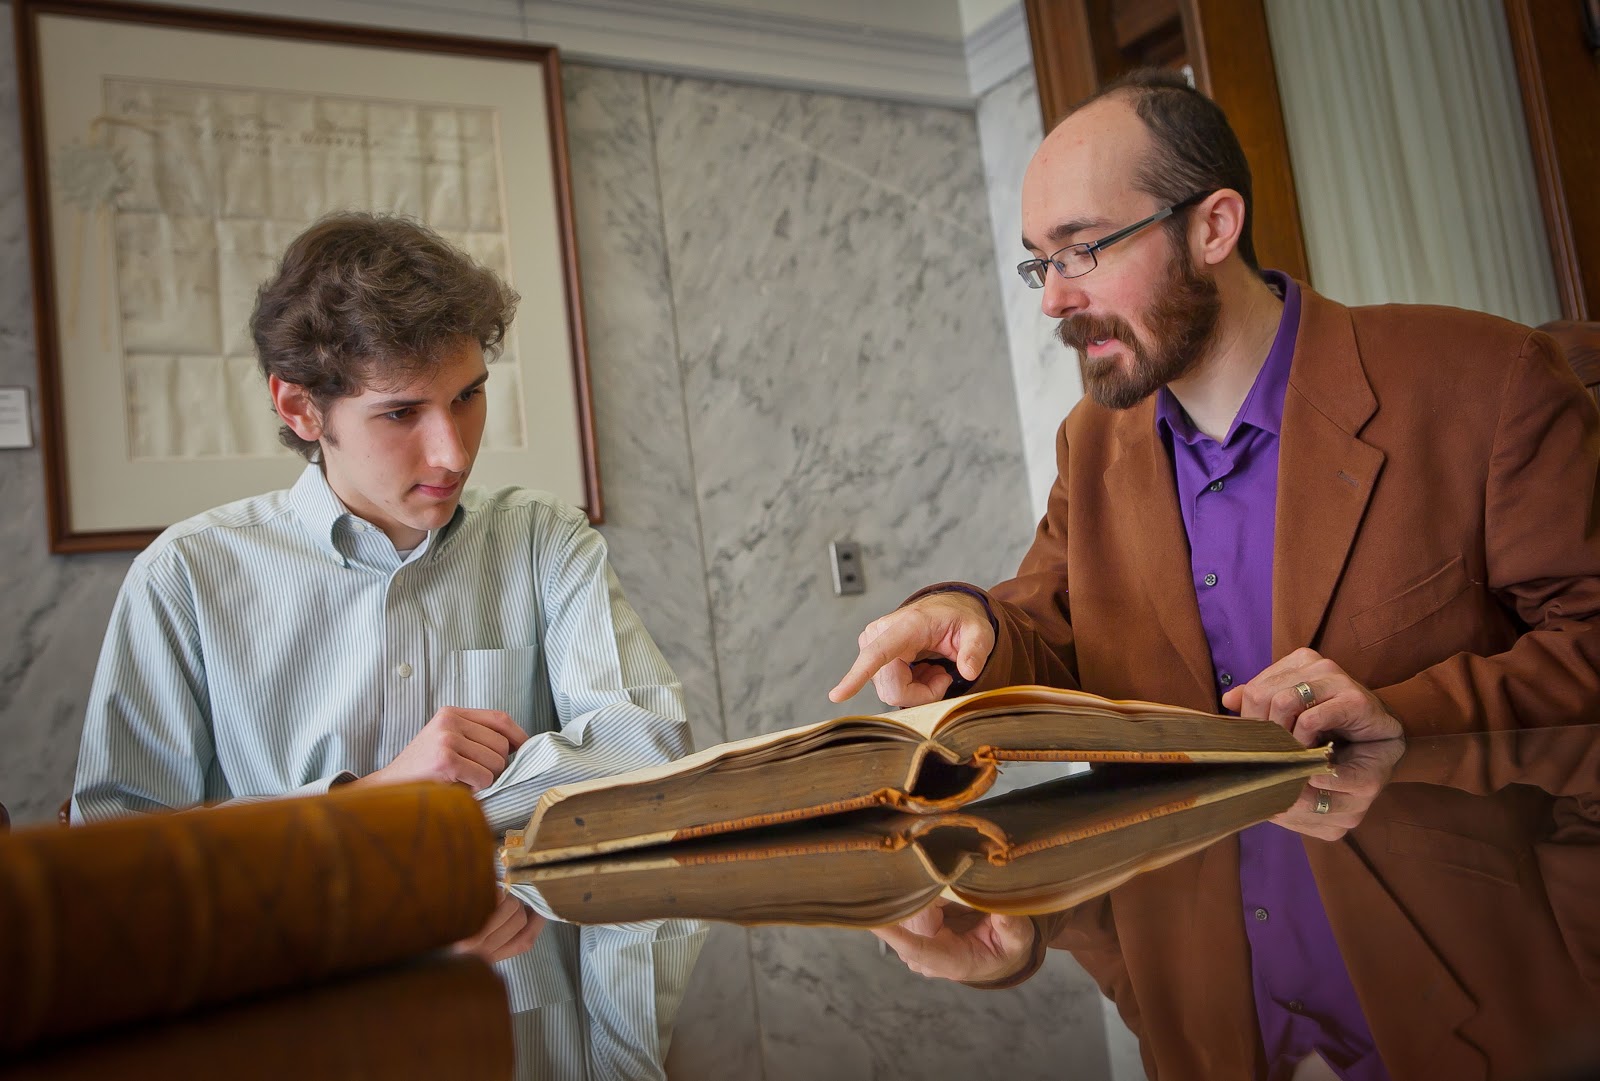 professor and student looking at an old book together